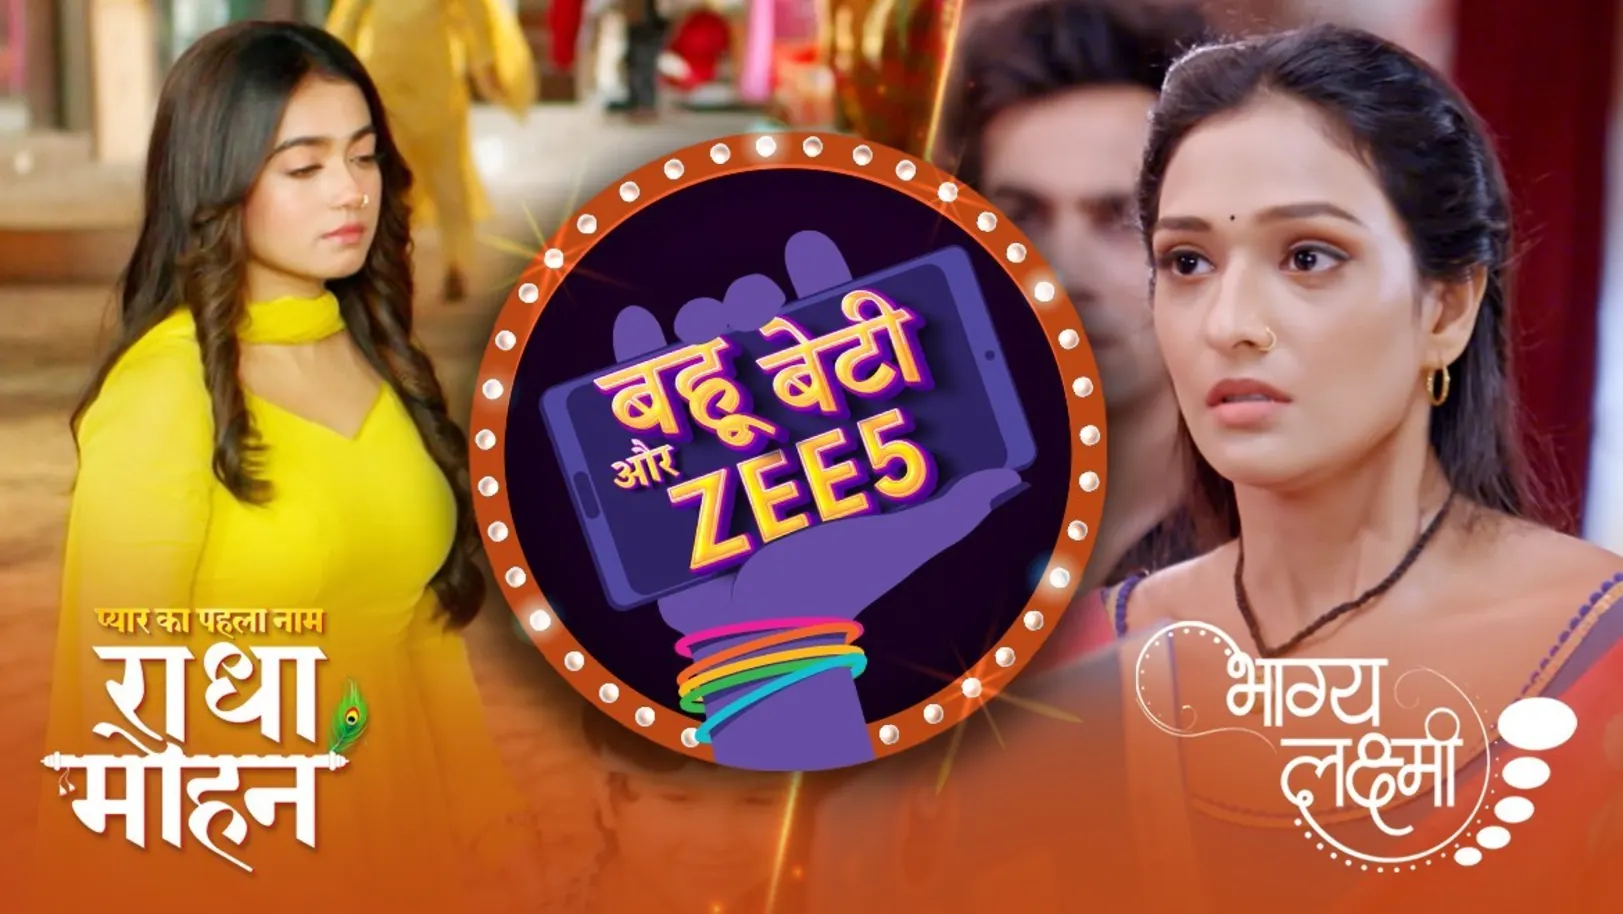 Stories of Love and Trust in the Relationships | Bahu Beti Aur ZEE5 Episode 20